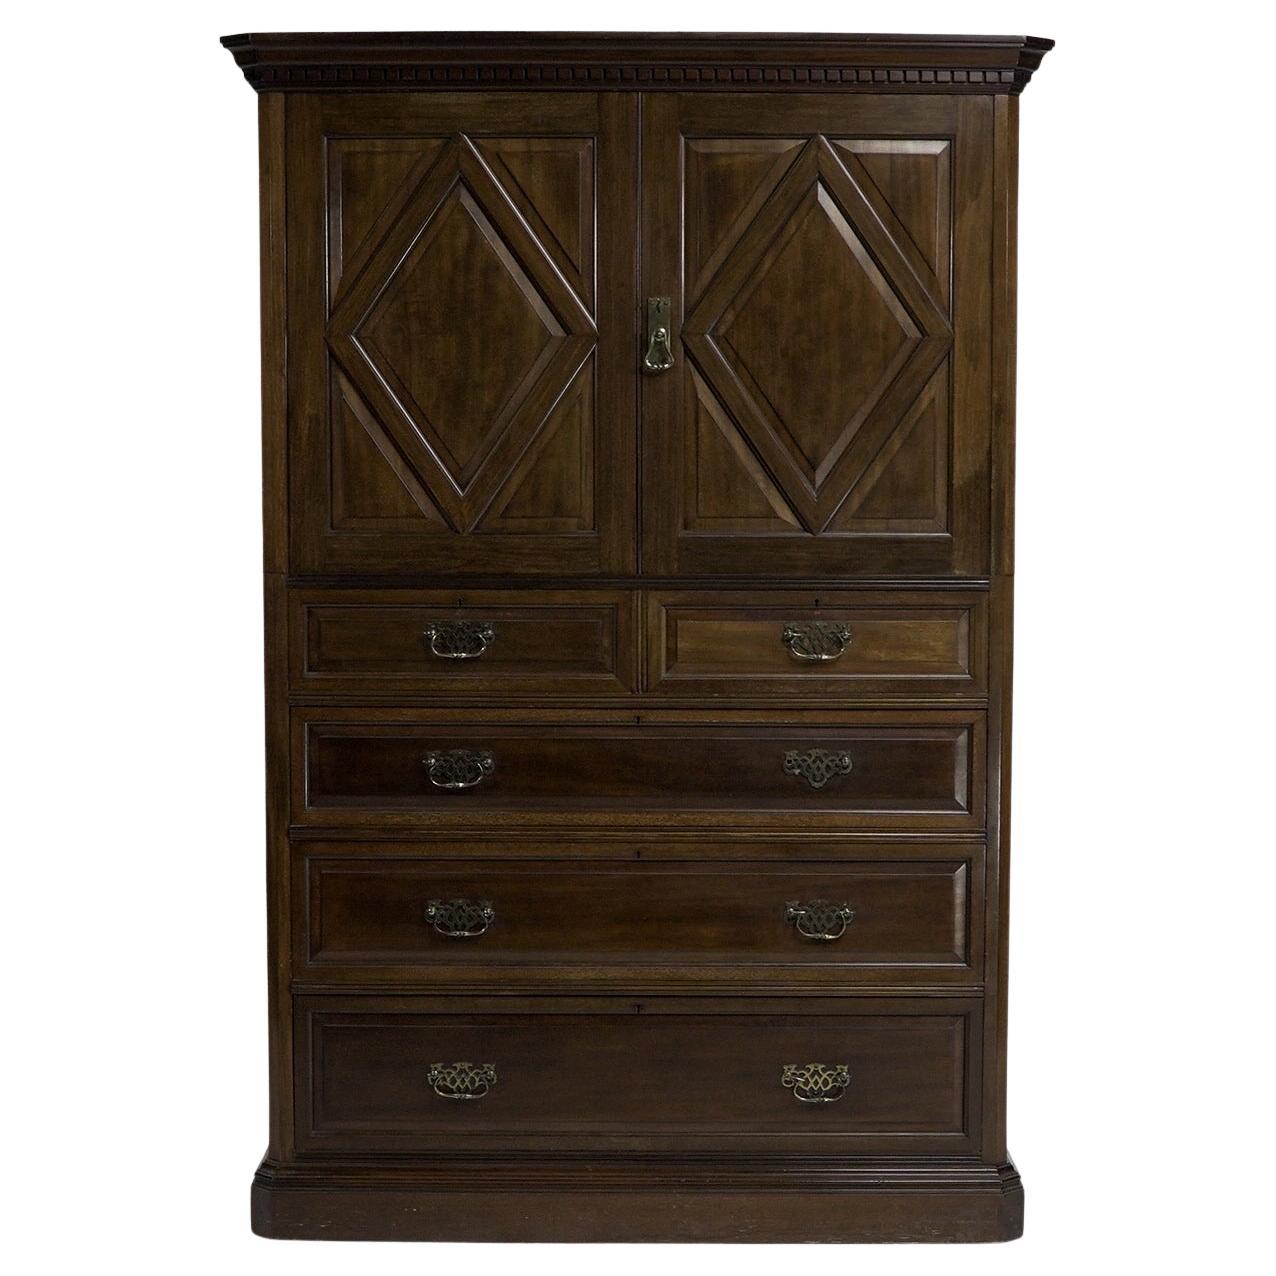 Morris & Co. An Aesthetic Movement Walnut tallboy with internal sliding drawers. For Sale